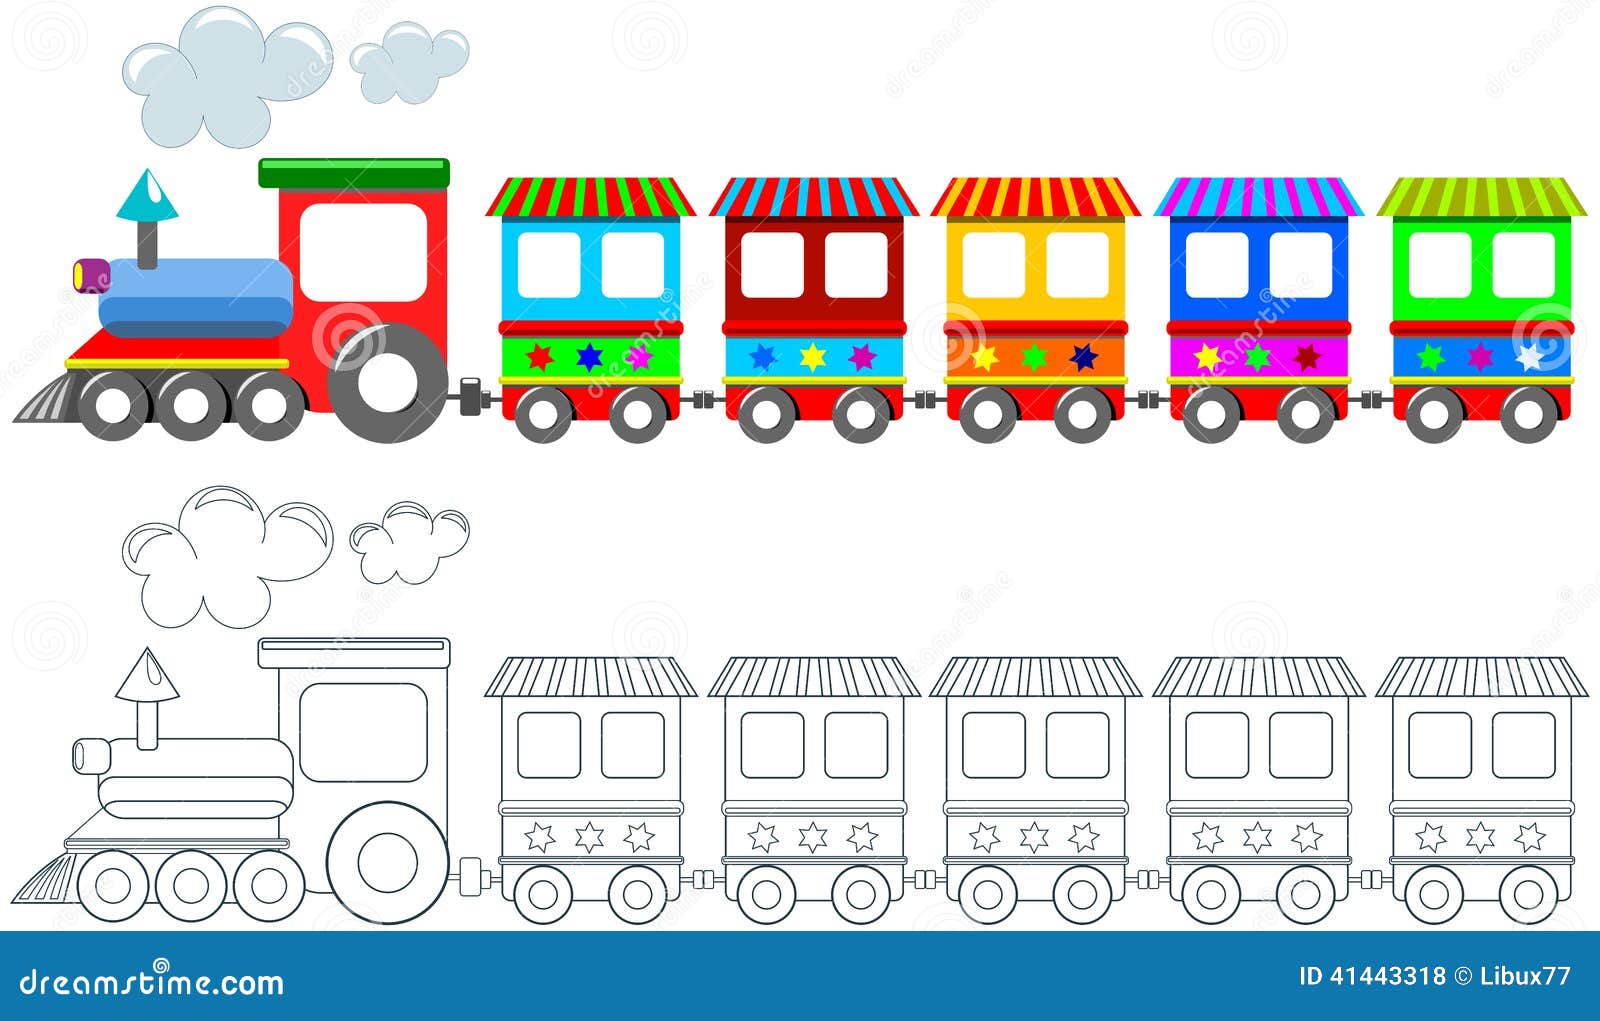 Toy Colorful Train Coloring Page Lokalisierte Vektor Abbildung ...